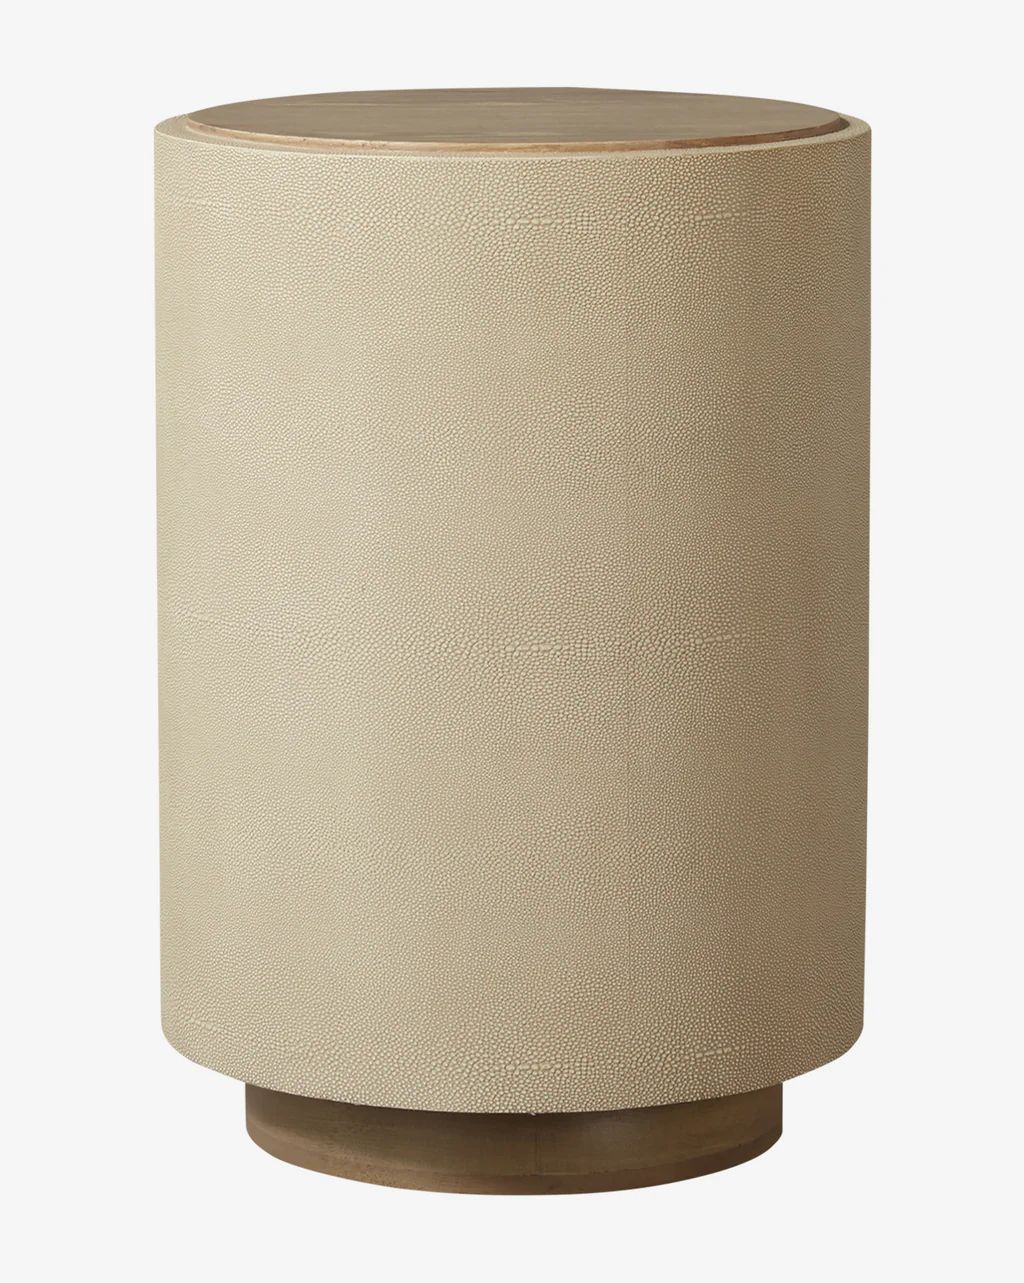 Adderley Side Table | McGee & Co.